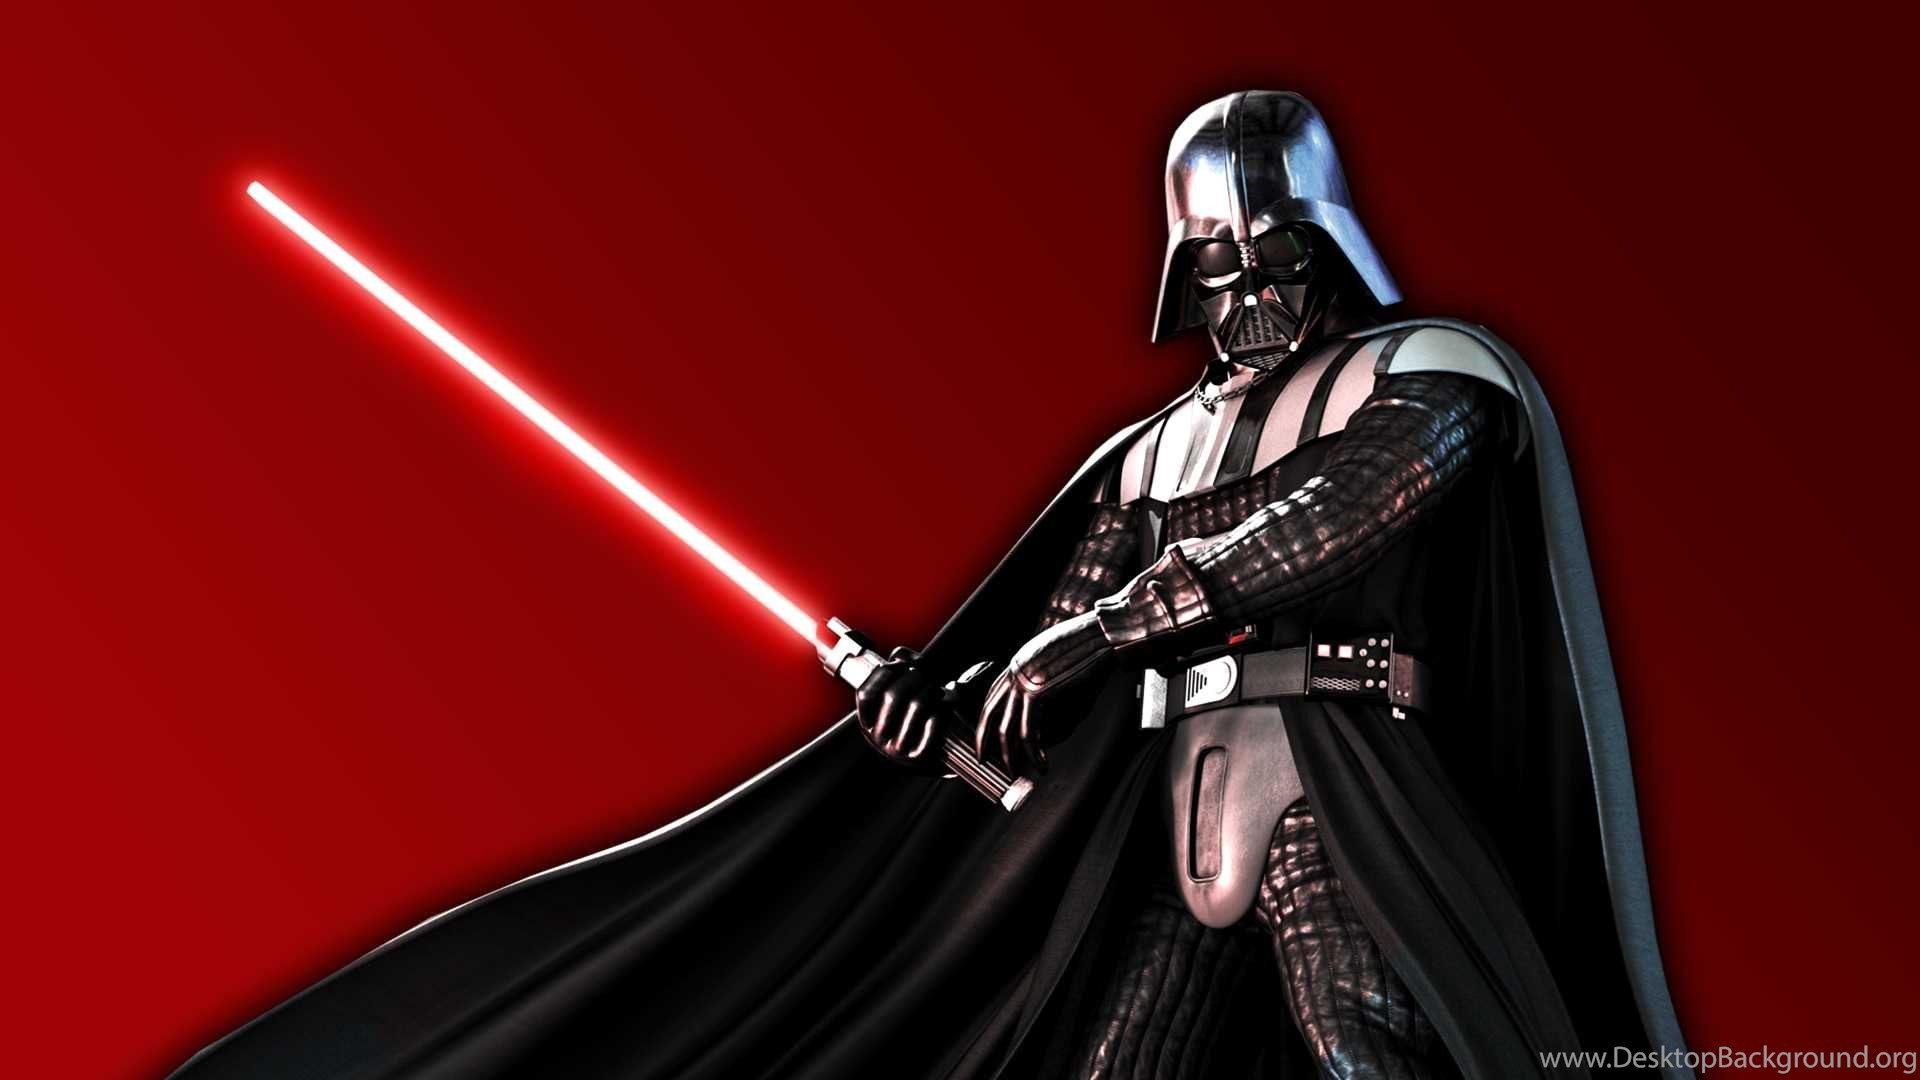 1920x1080 ... Darth Vader Wallpapers HD Best Collection Of Anakin Skywalker